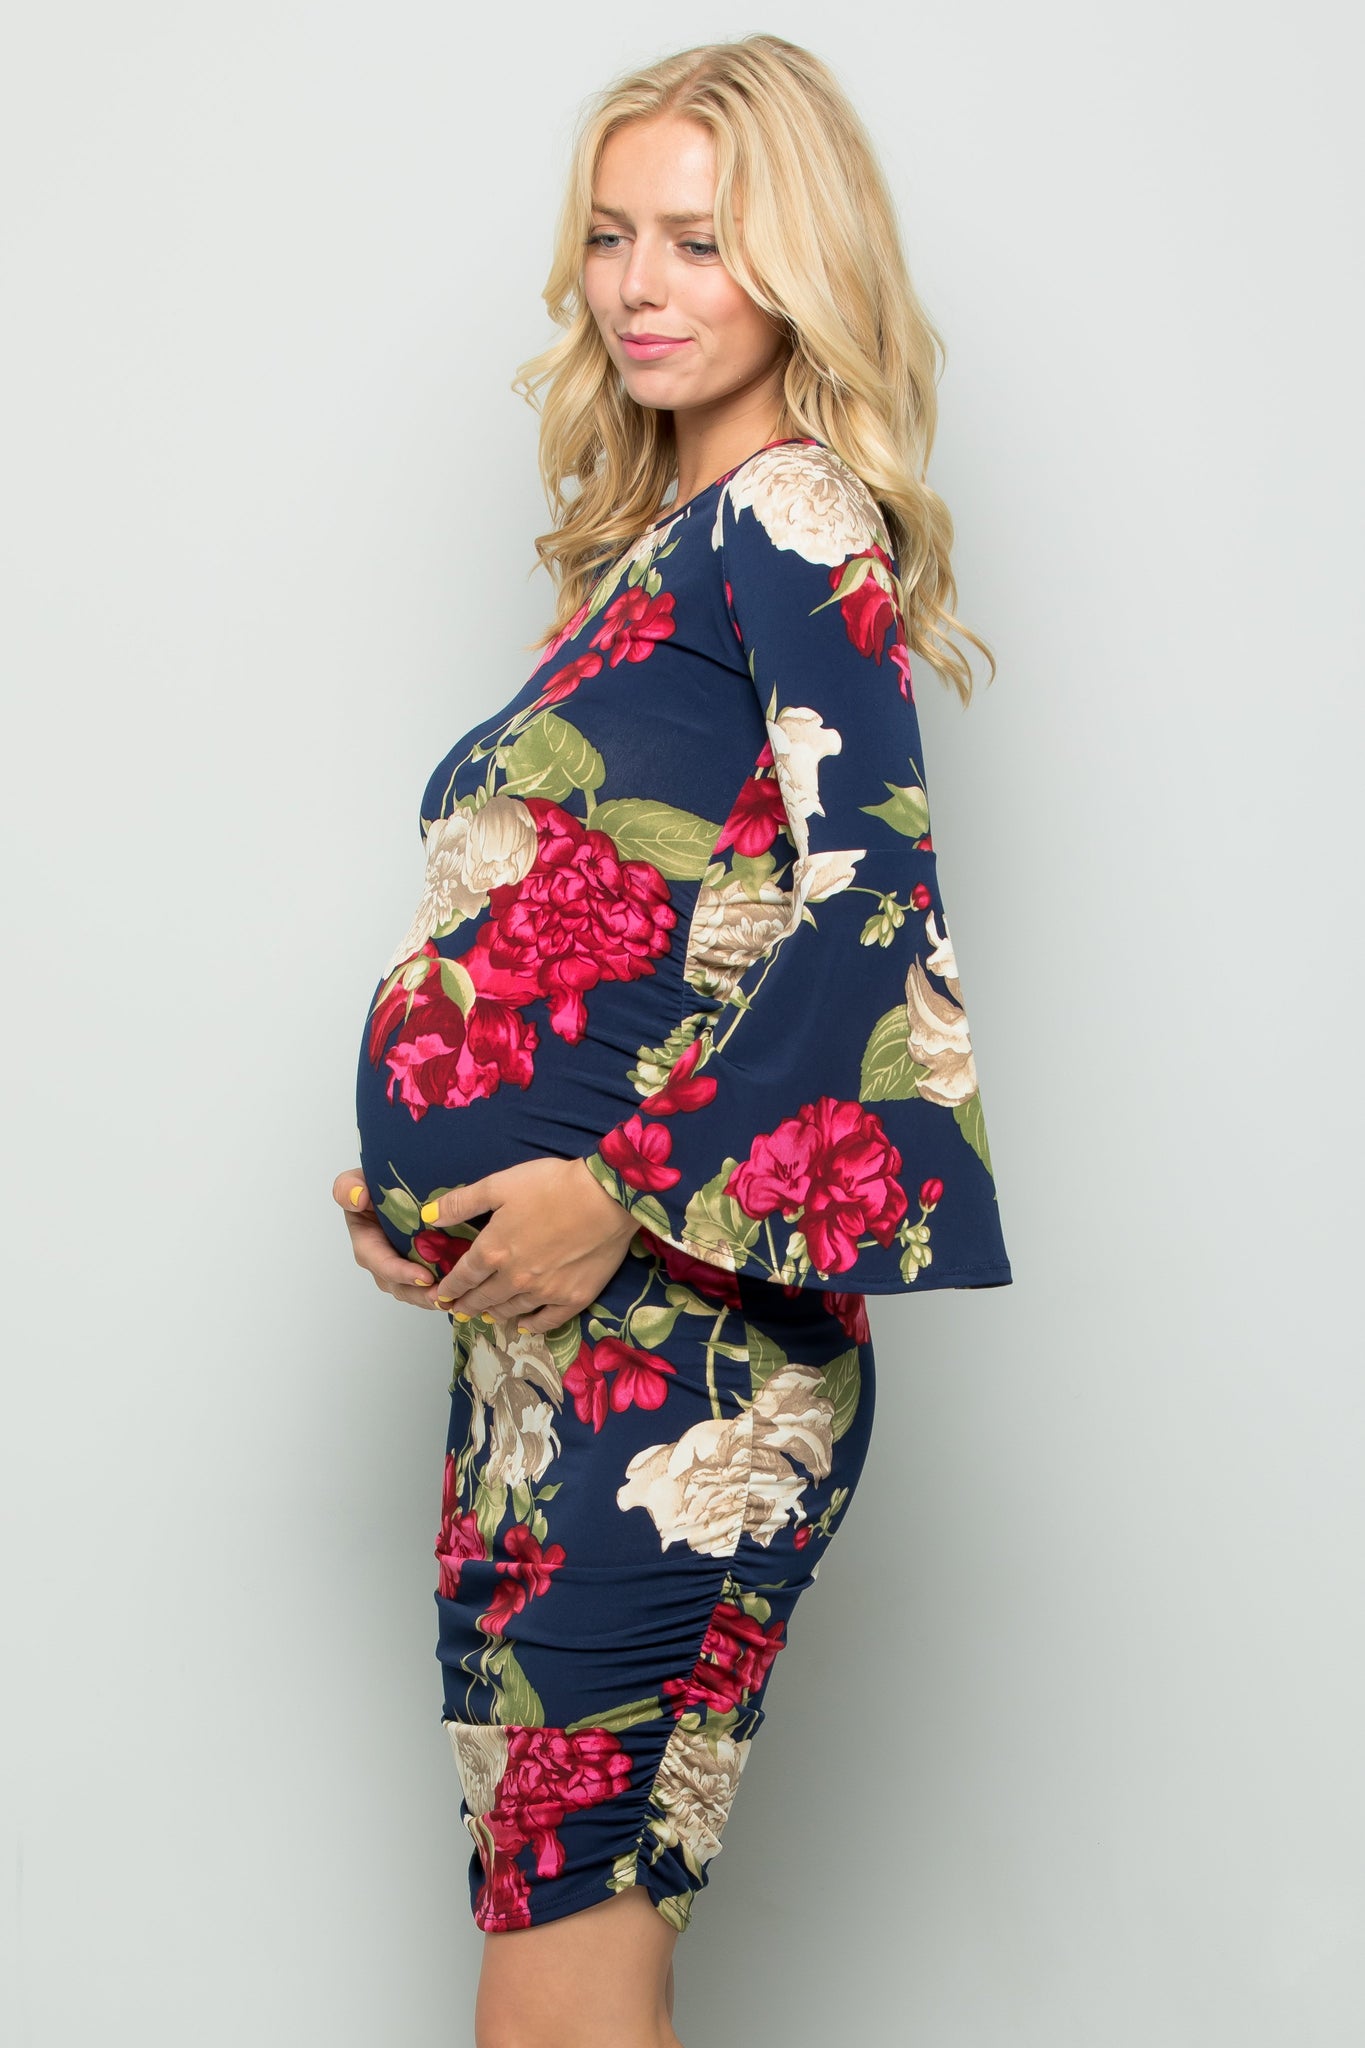 maternity pregnancy baby shower floral bell long sleeve round neck crewneck knee summer cocktail bodycon dress